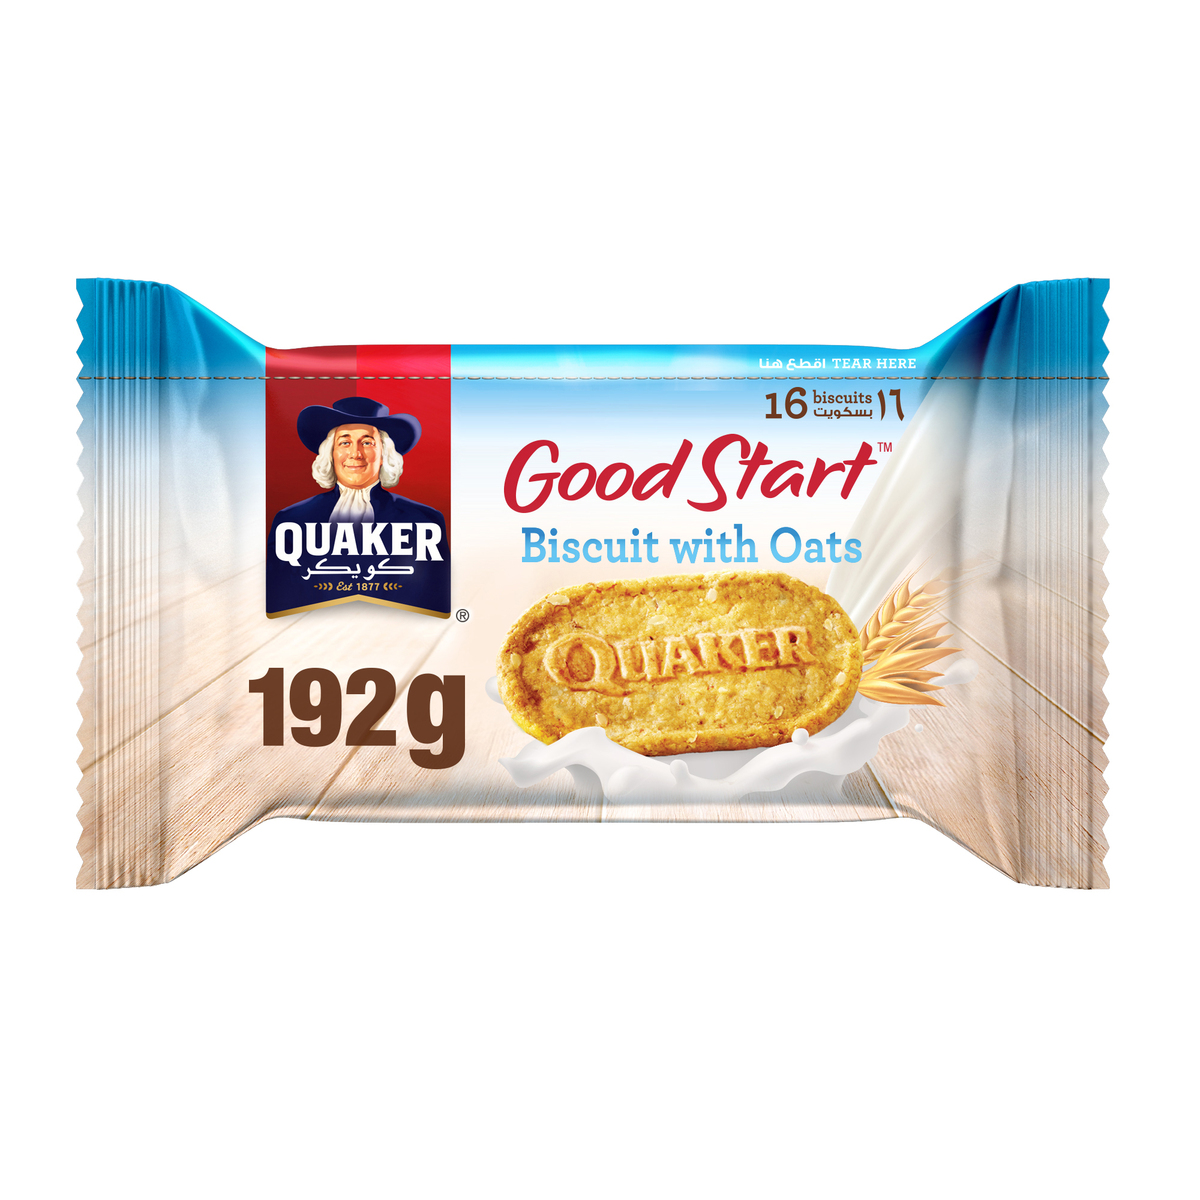 Quaker Good Start Biscuits with Oats 192 g